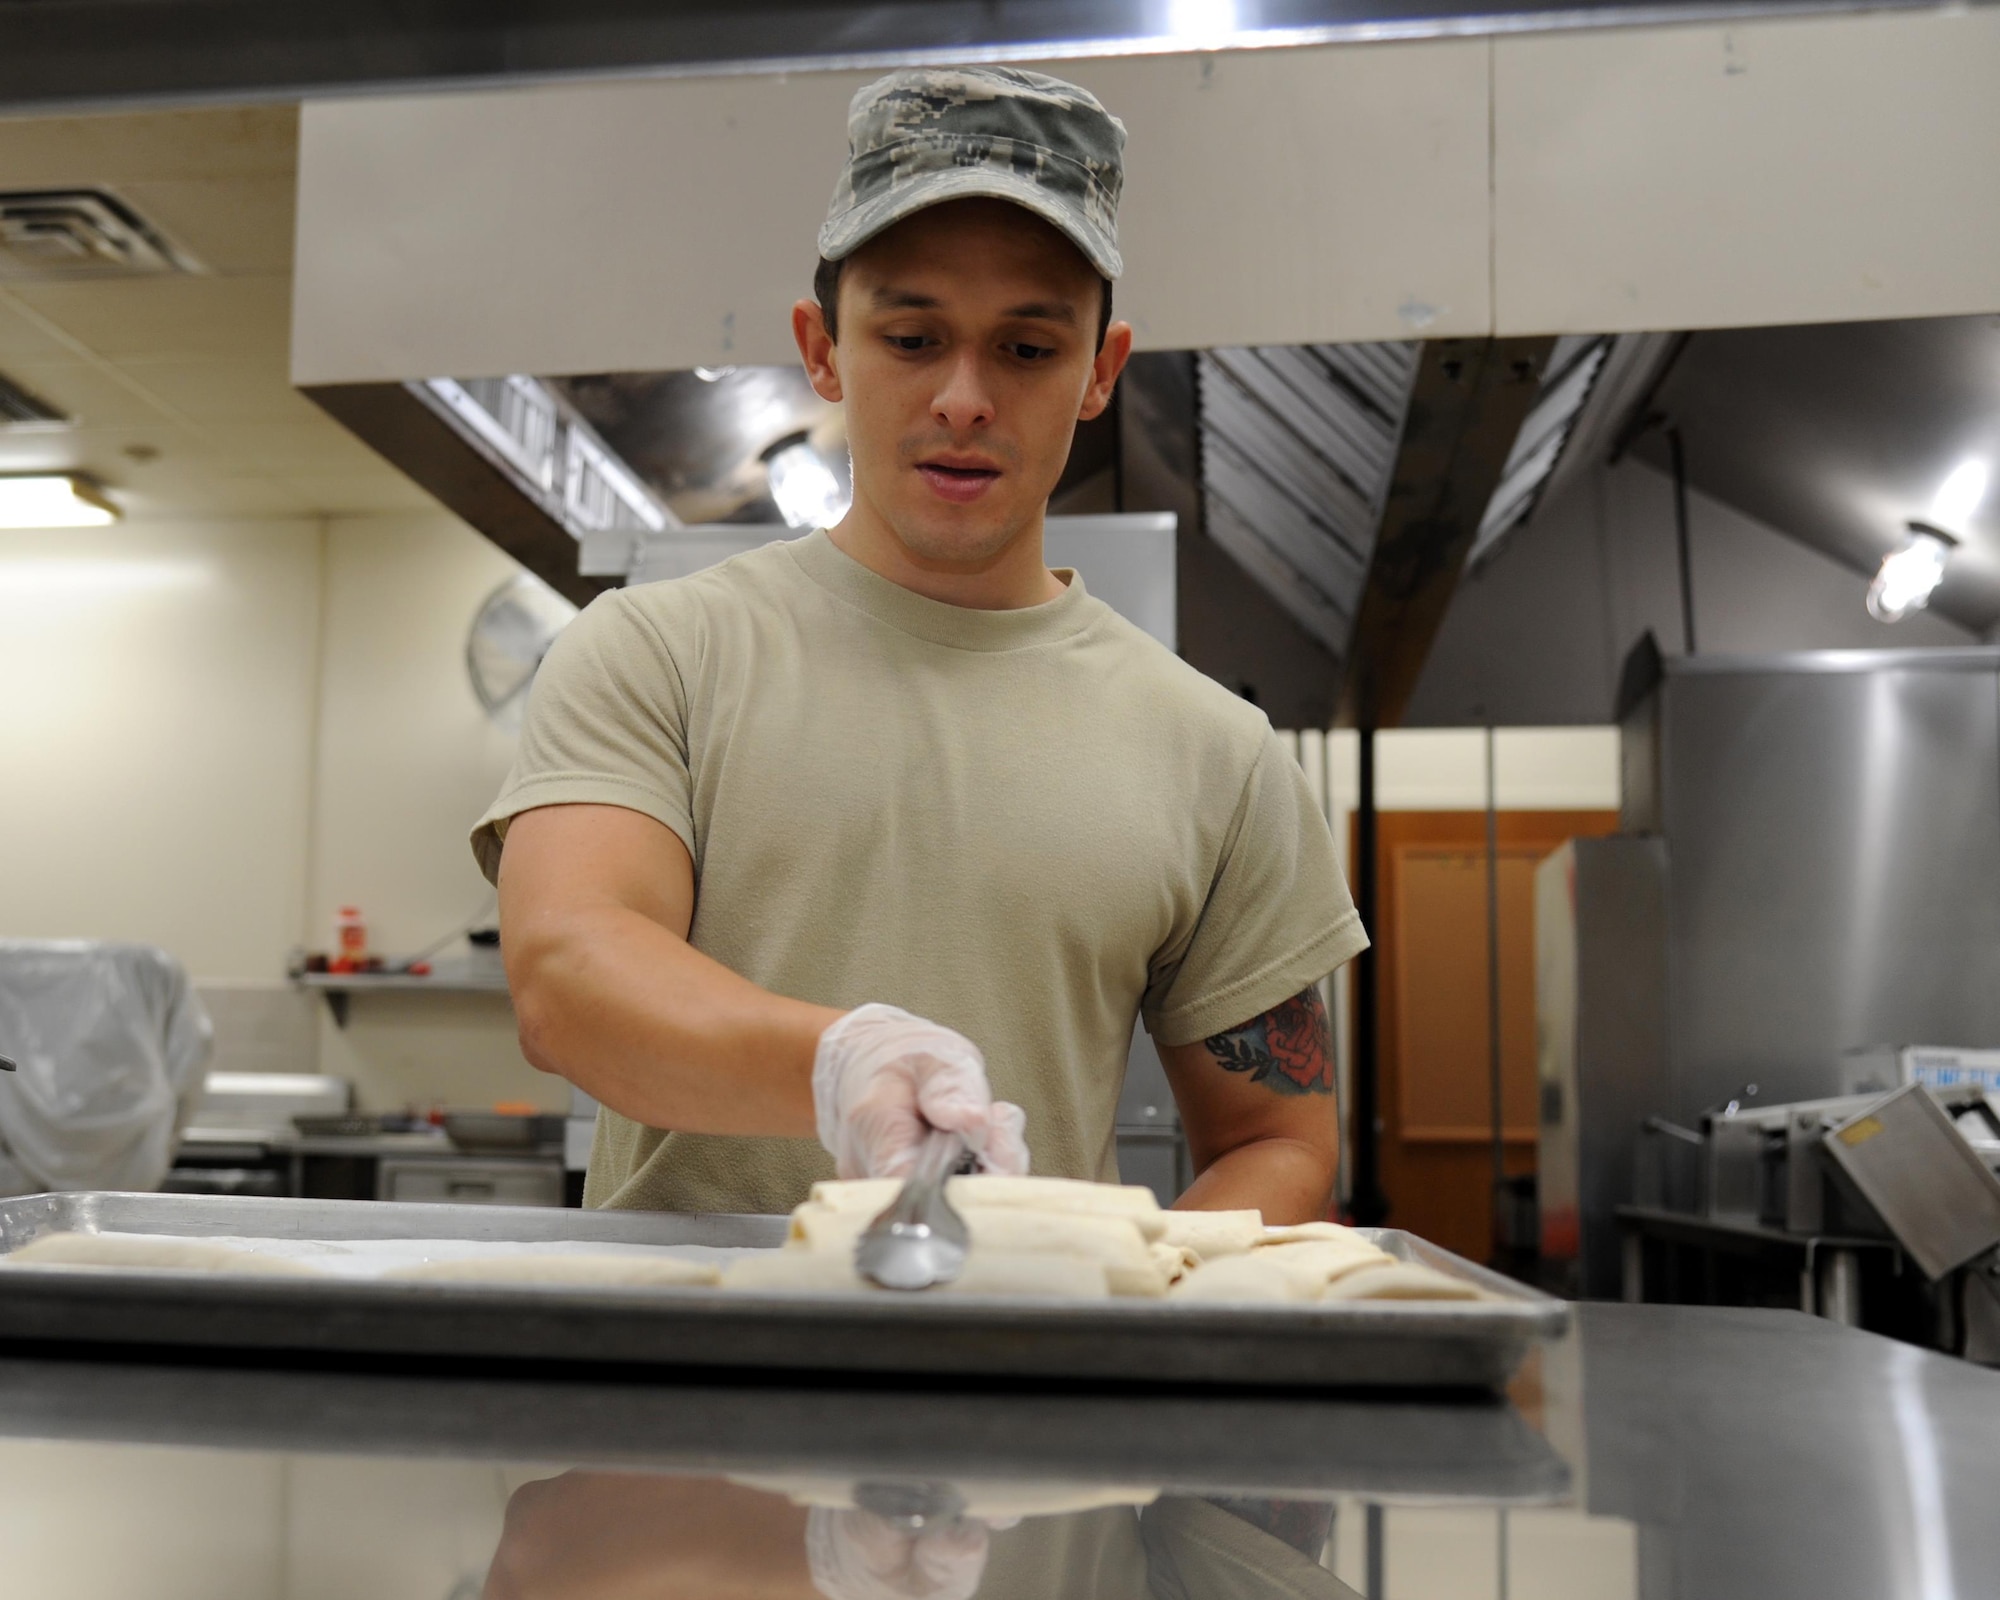 U.S. Air Force Senior Airman Mathew Sanchez, services technician, 927th Air Refueling Wing, MacDill Air Force Base, Florida, prepares to serve breakfast burritos. Sanchez filled a critical role in feeding more than 140 medical and support personnel that participated the Ozark Highlands Innovated Readiness Training, Mountain Home, Arkansas, 5-12 June, a mission that provided no-cost medical care to a local community. (U.S. Air Force photo by Tech. Sgt. Peter Dean)   